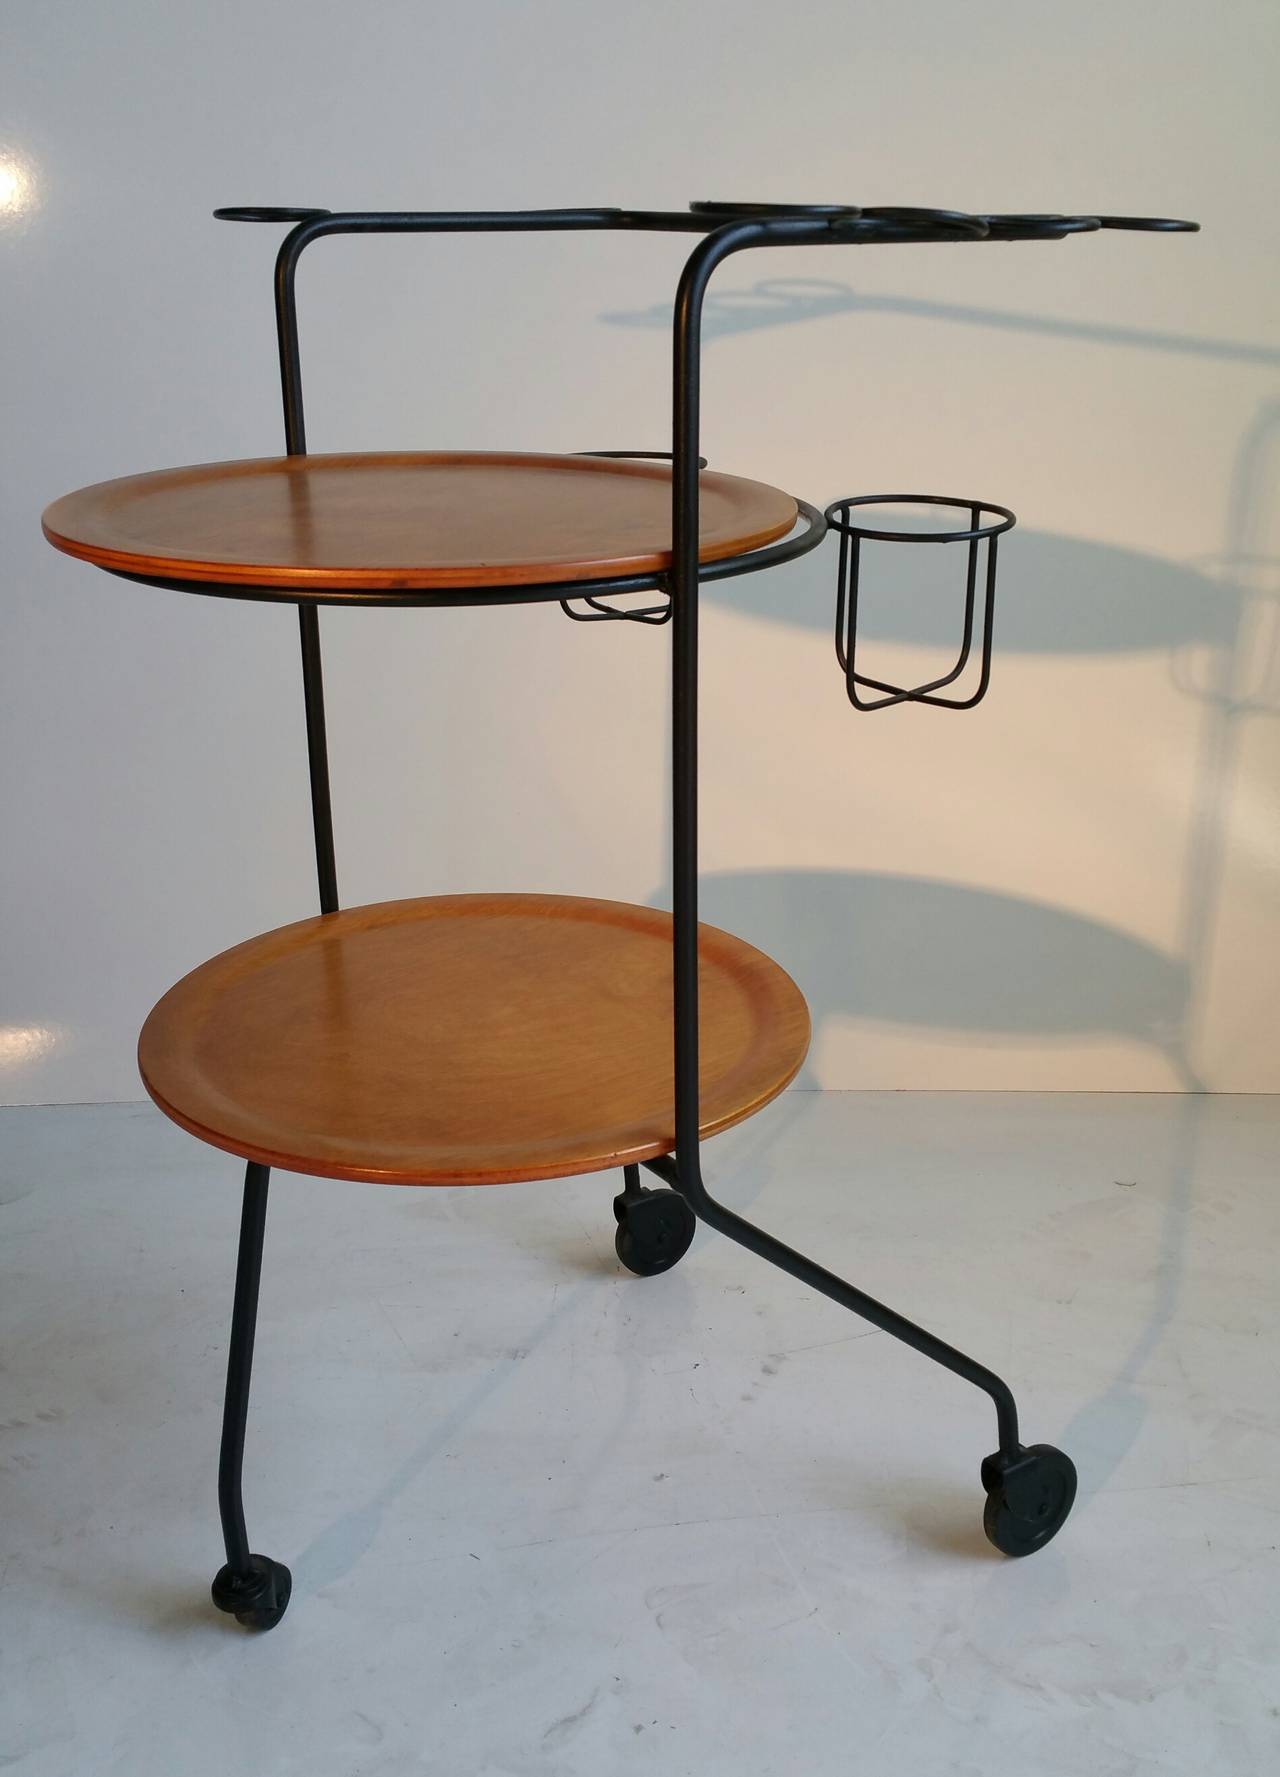 Two-tier rolling bar cart in tubular black metal with eight glass holders, two bottle holders, and wood shelves. Designed by Tony Paul, USA, 1950s.